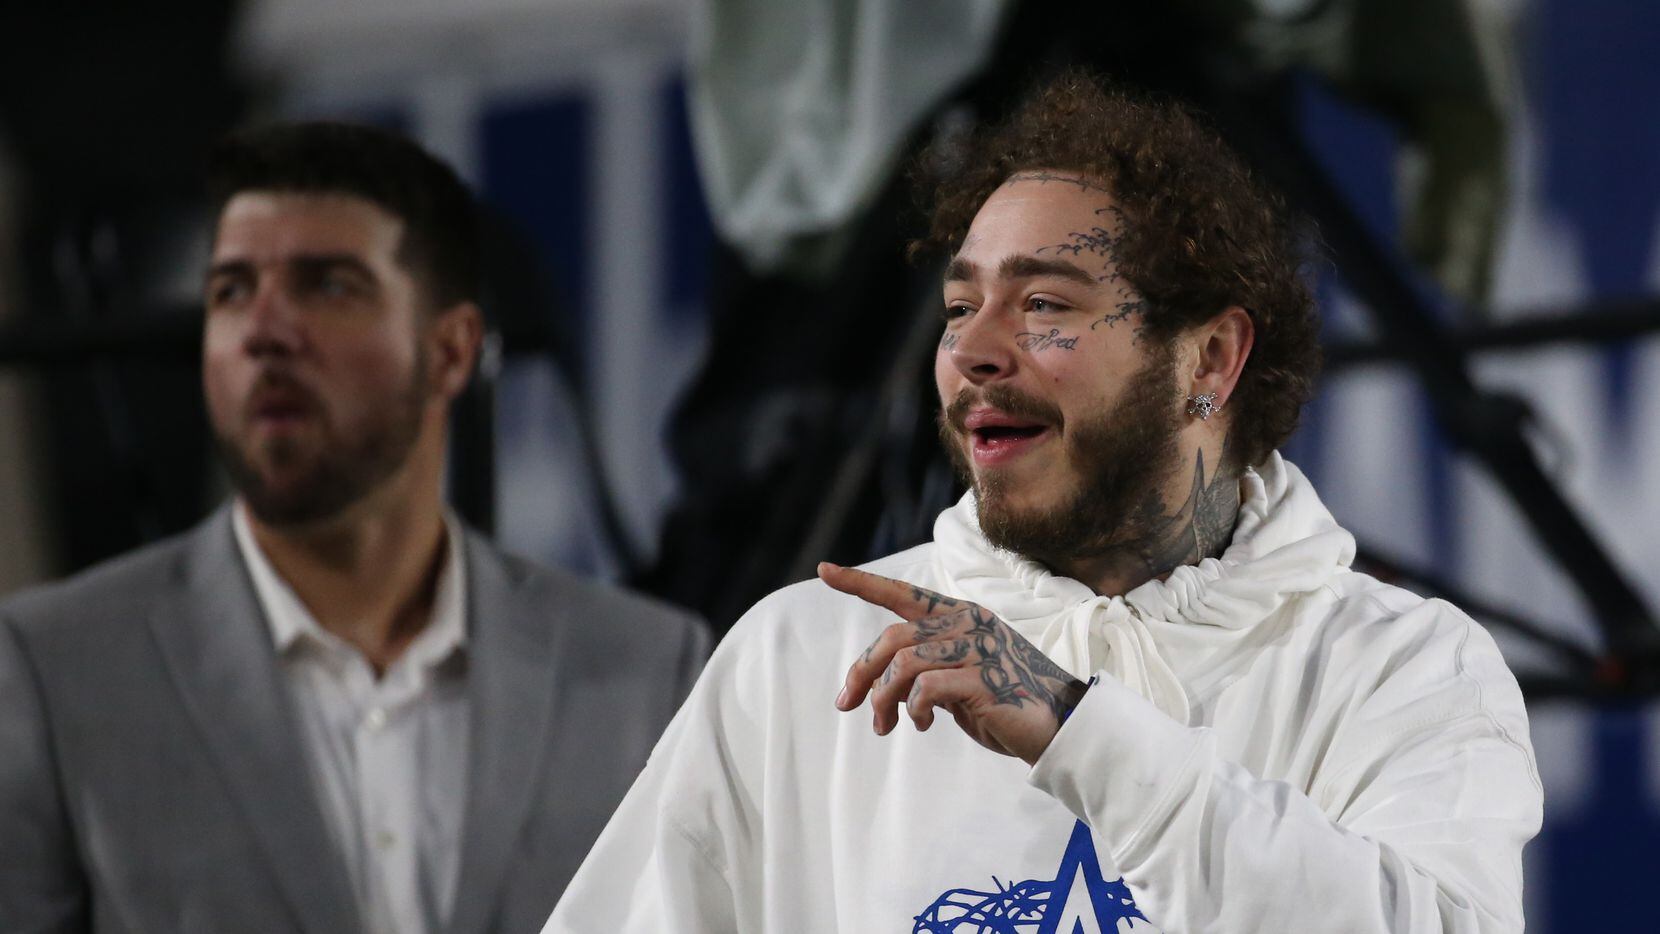 Post Malone has covered the hit Hootie and the Blowfish song "I Only Wanna Be With You," and...